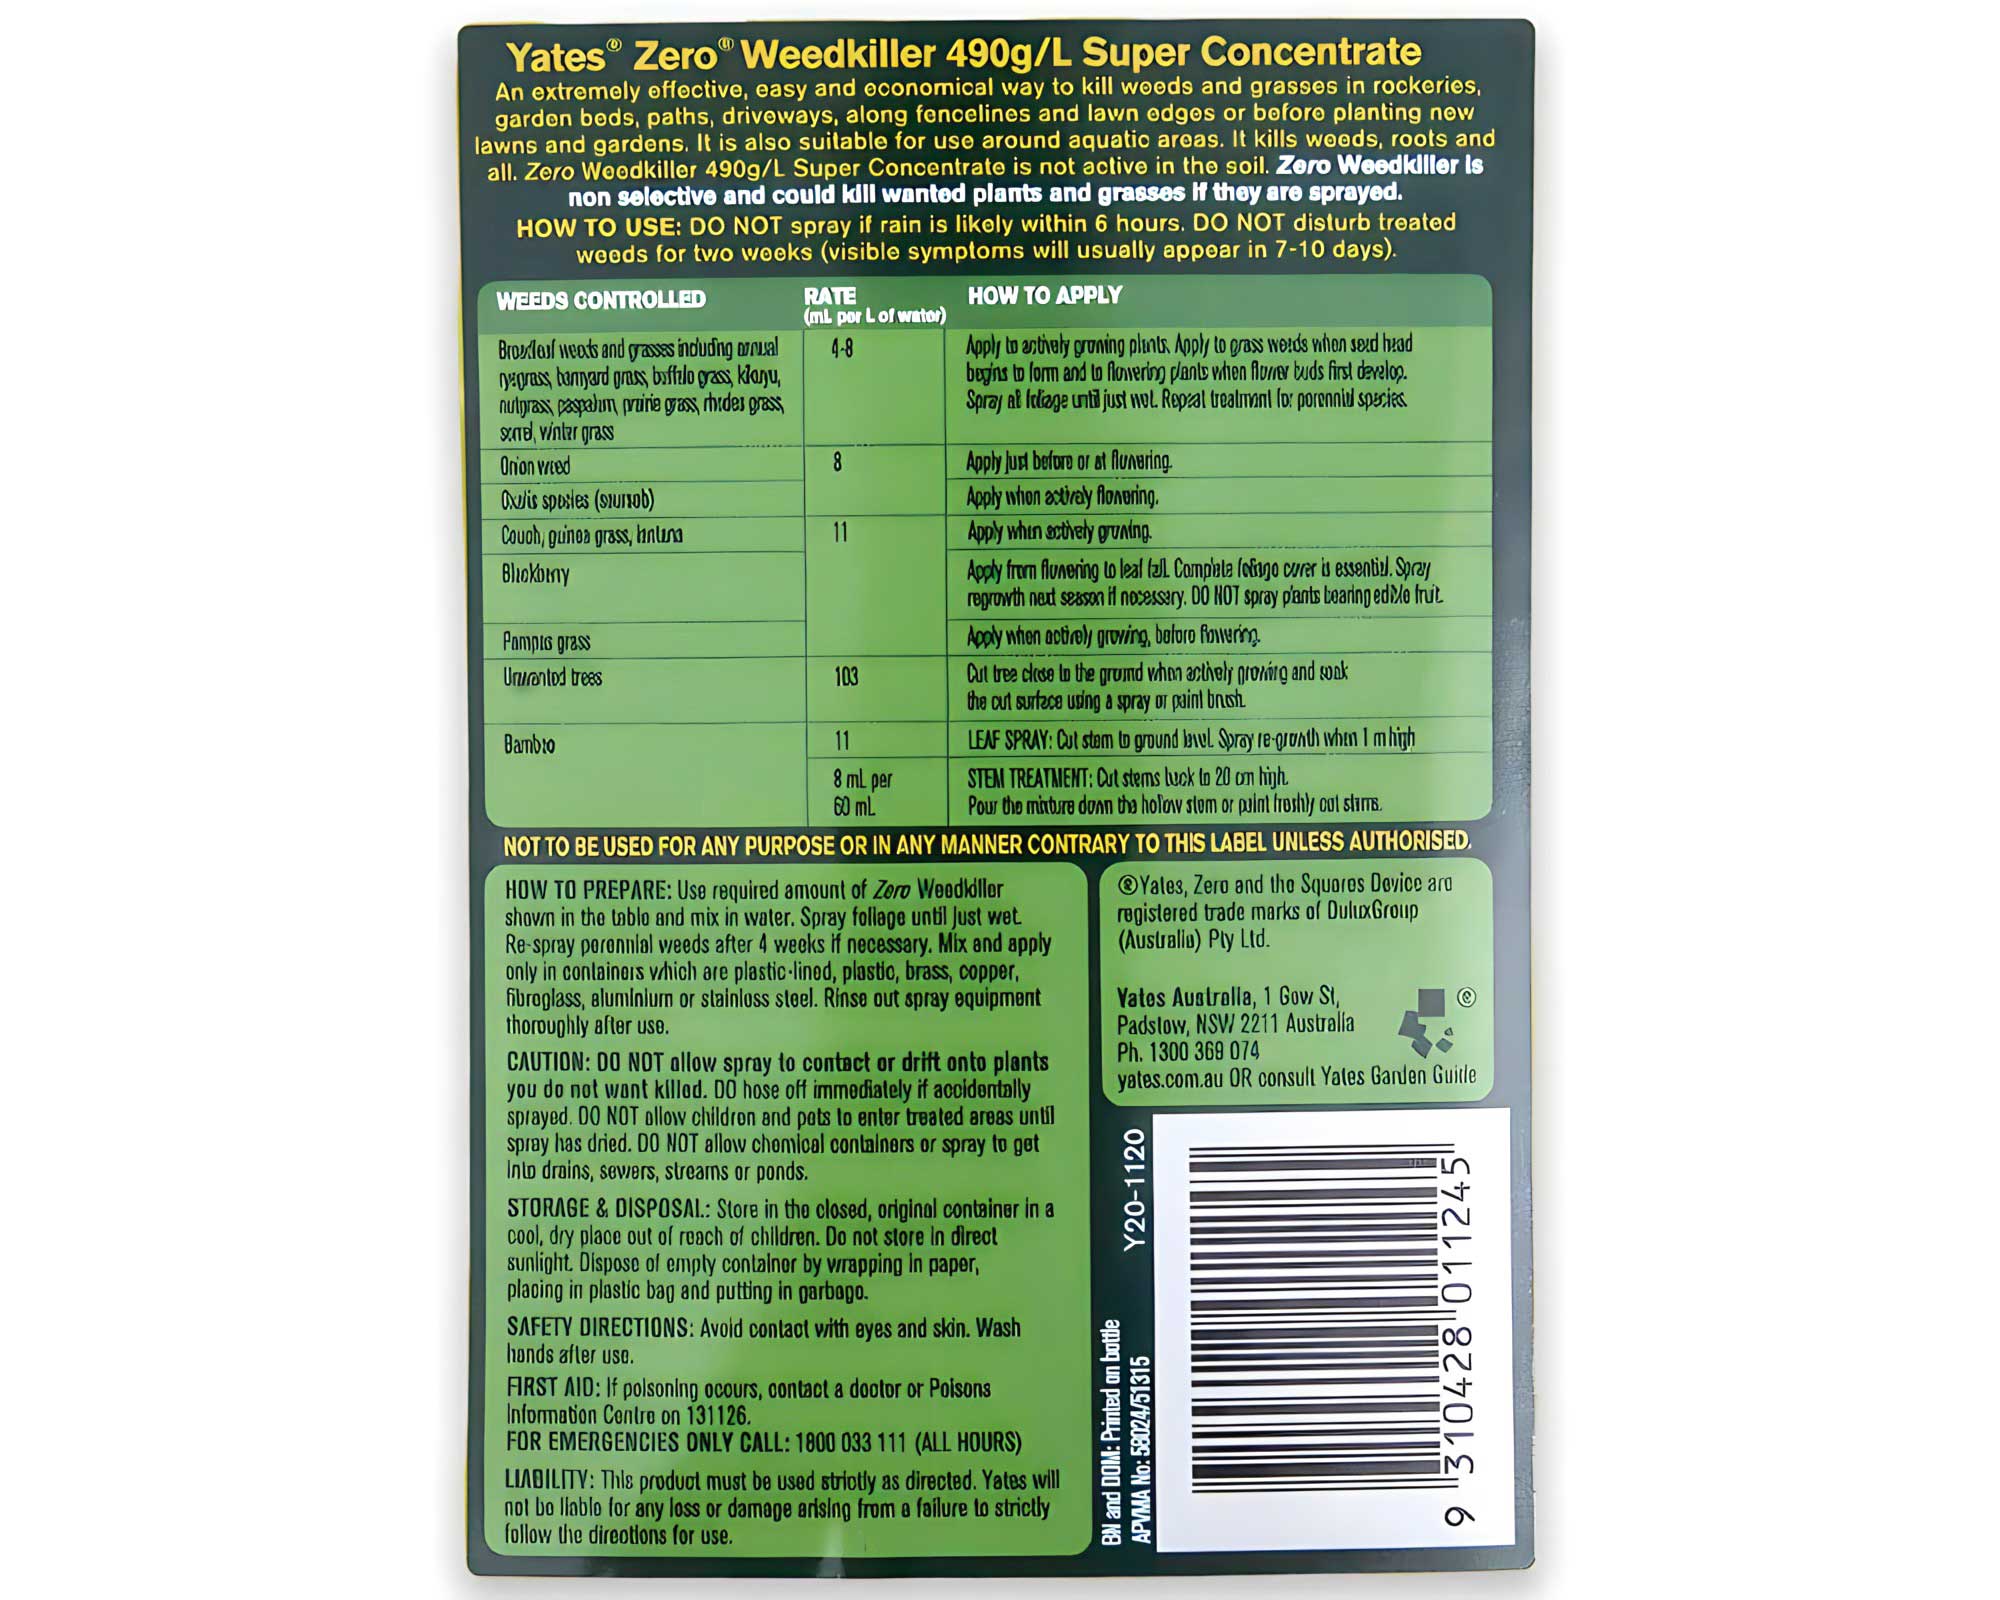 Zero Concentrated Weedkiller Info Panel